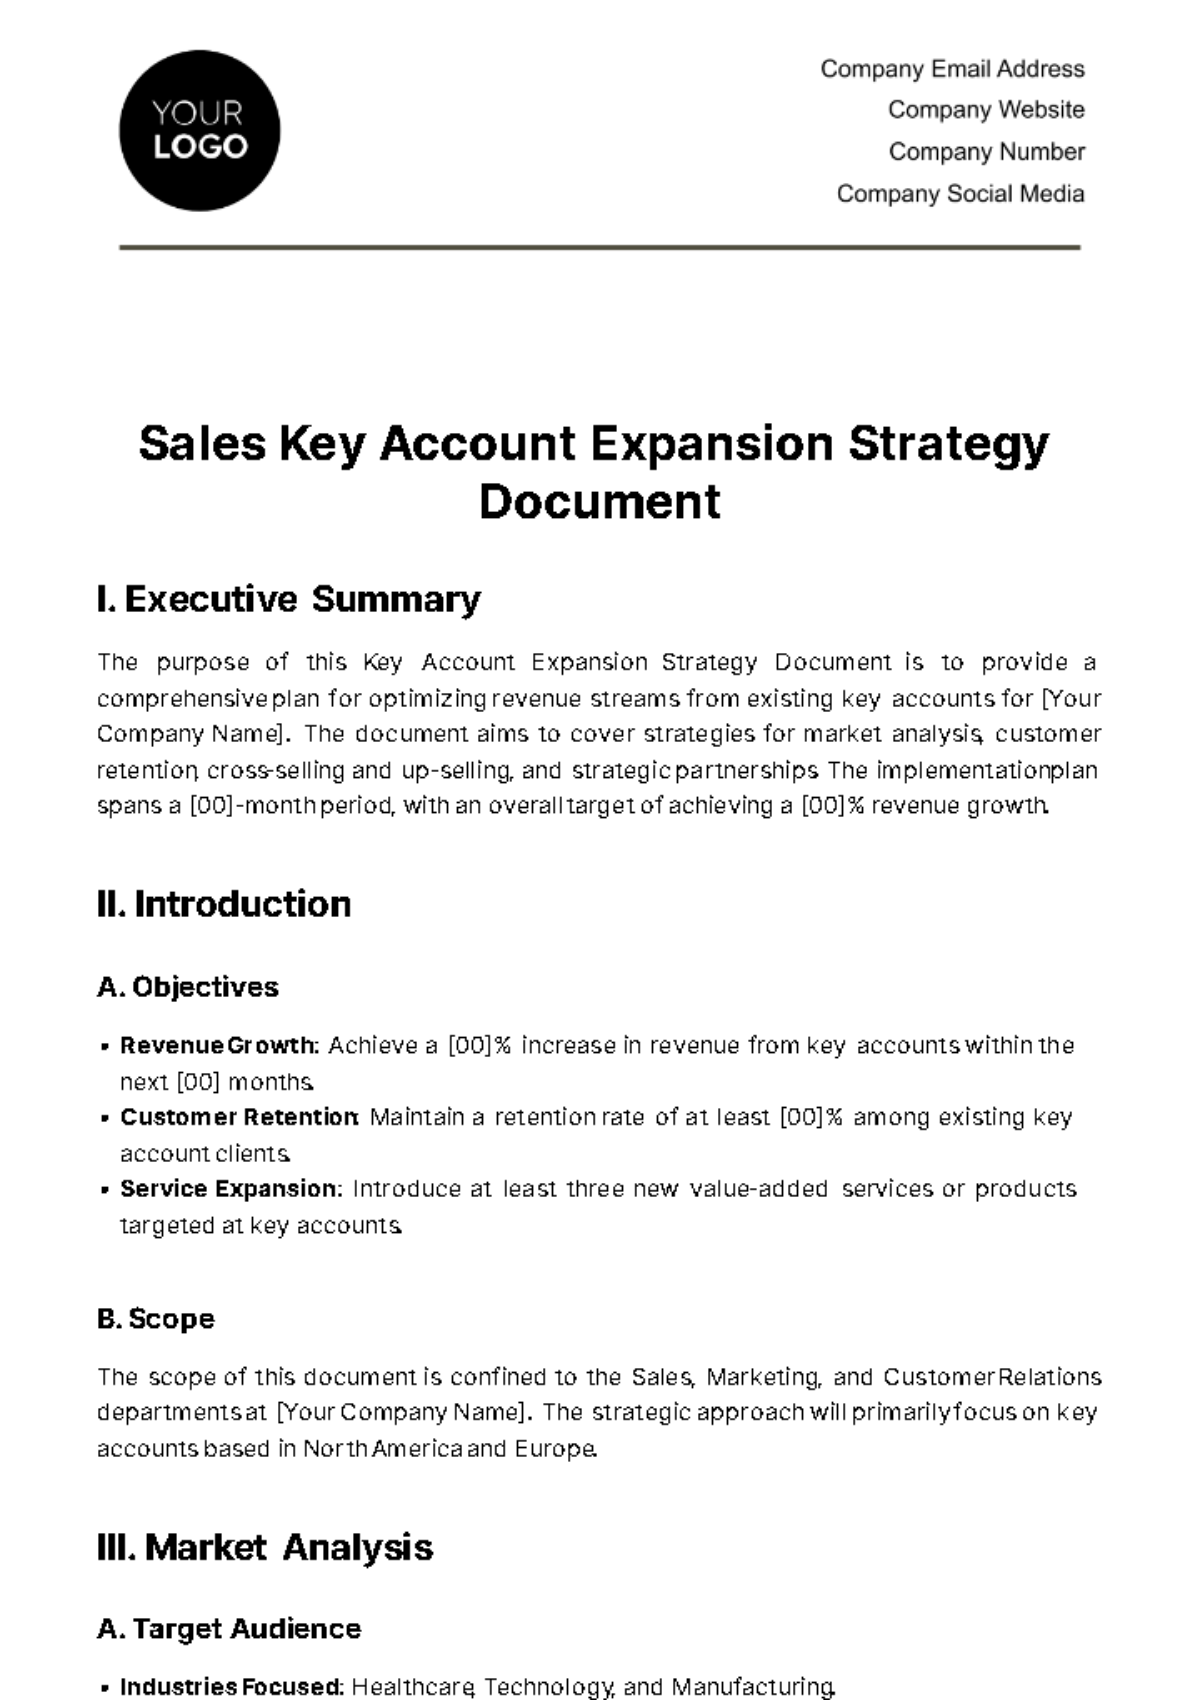 Sales Key Account Expansion Strategy Document Template